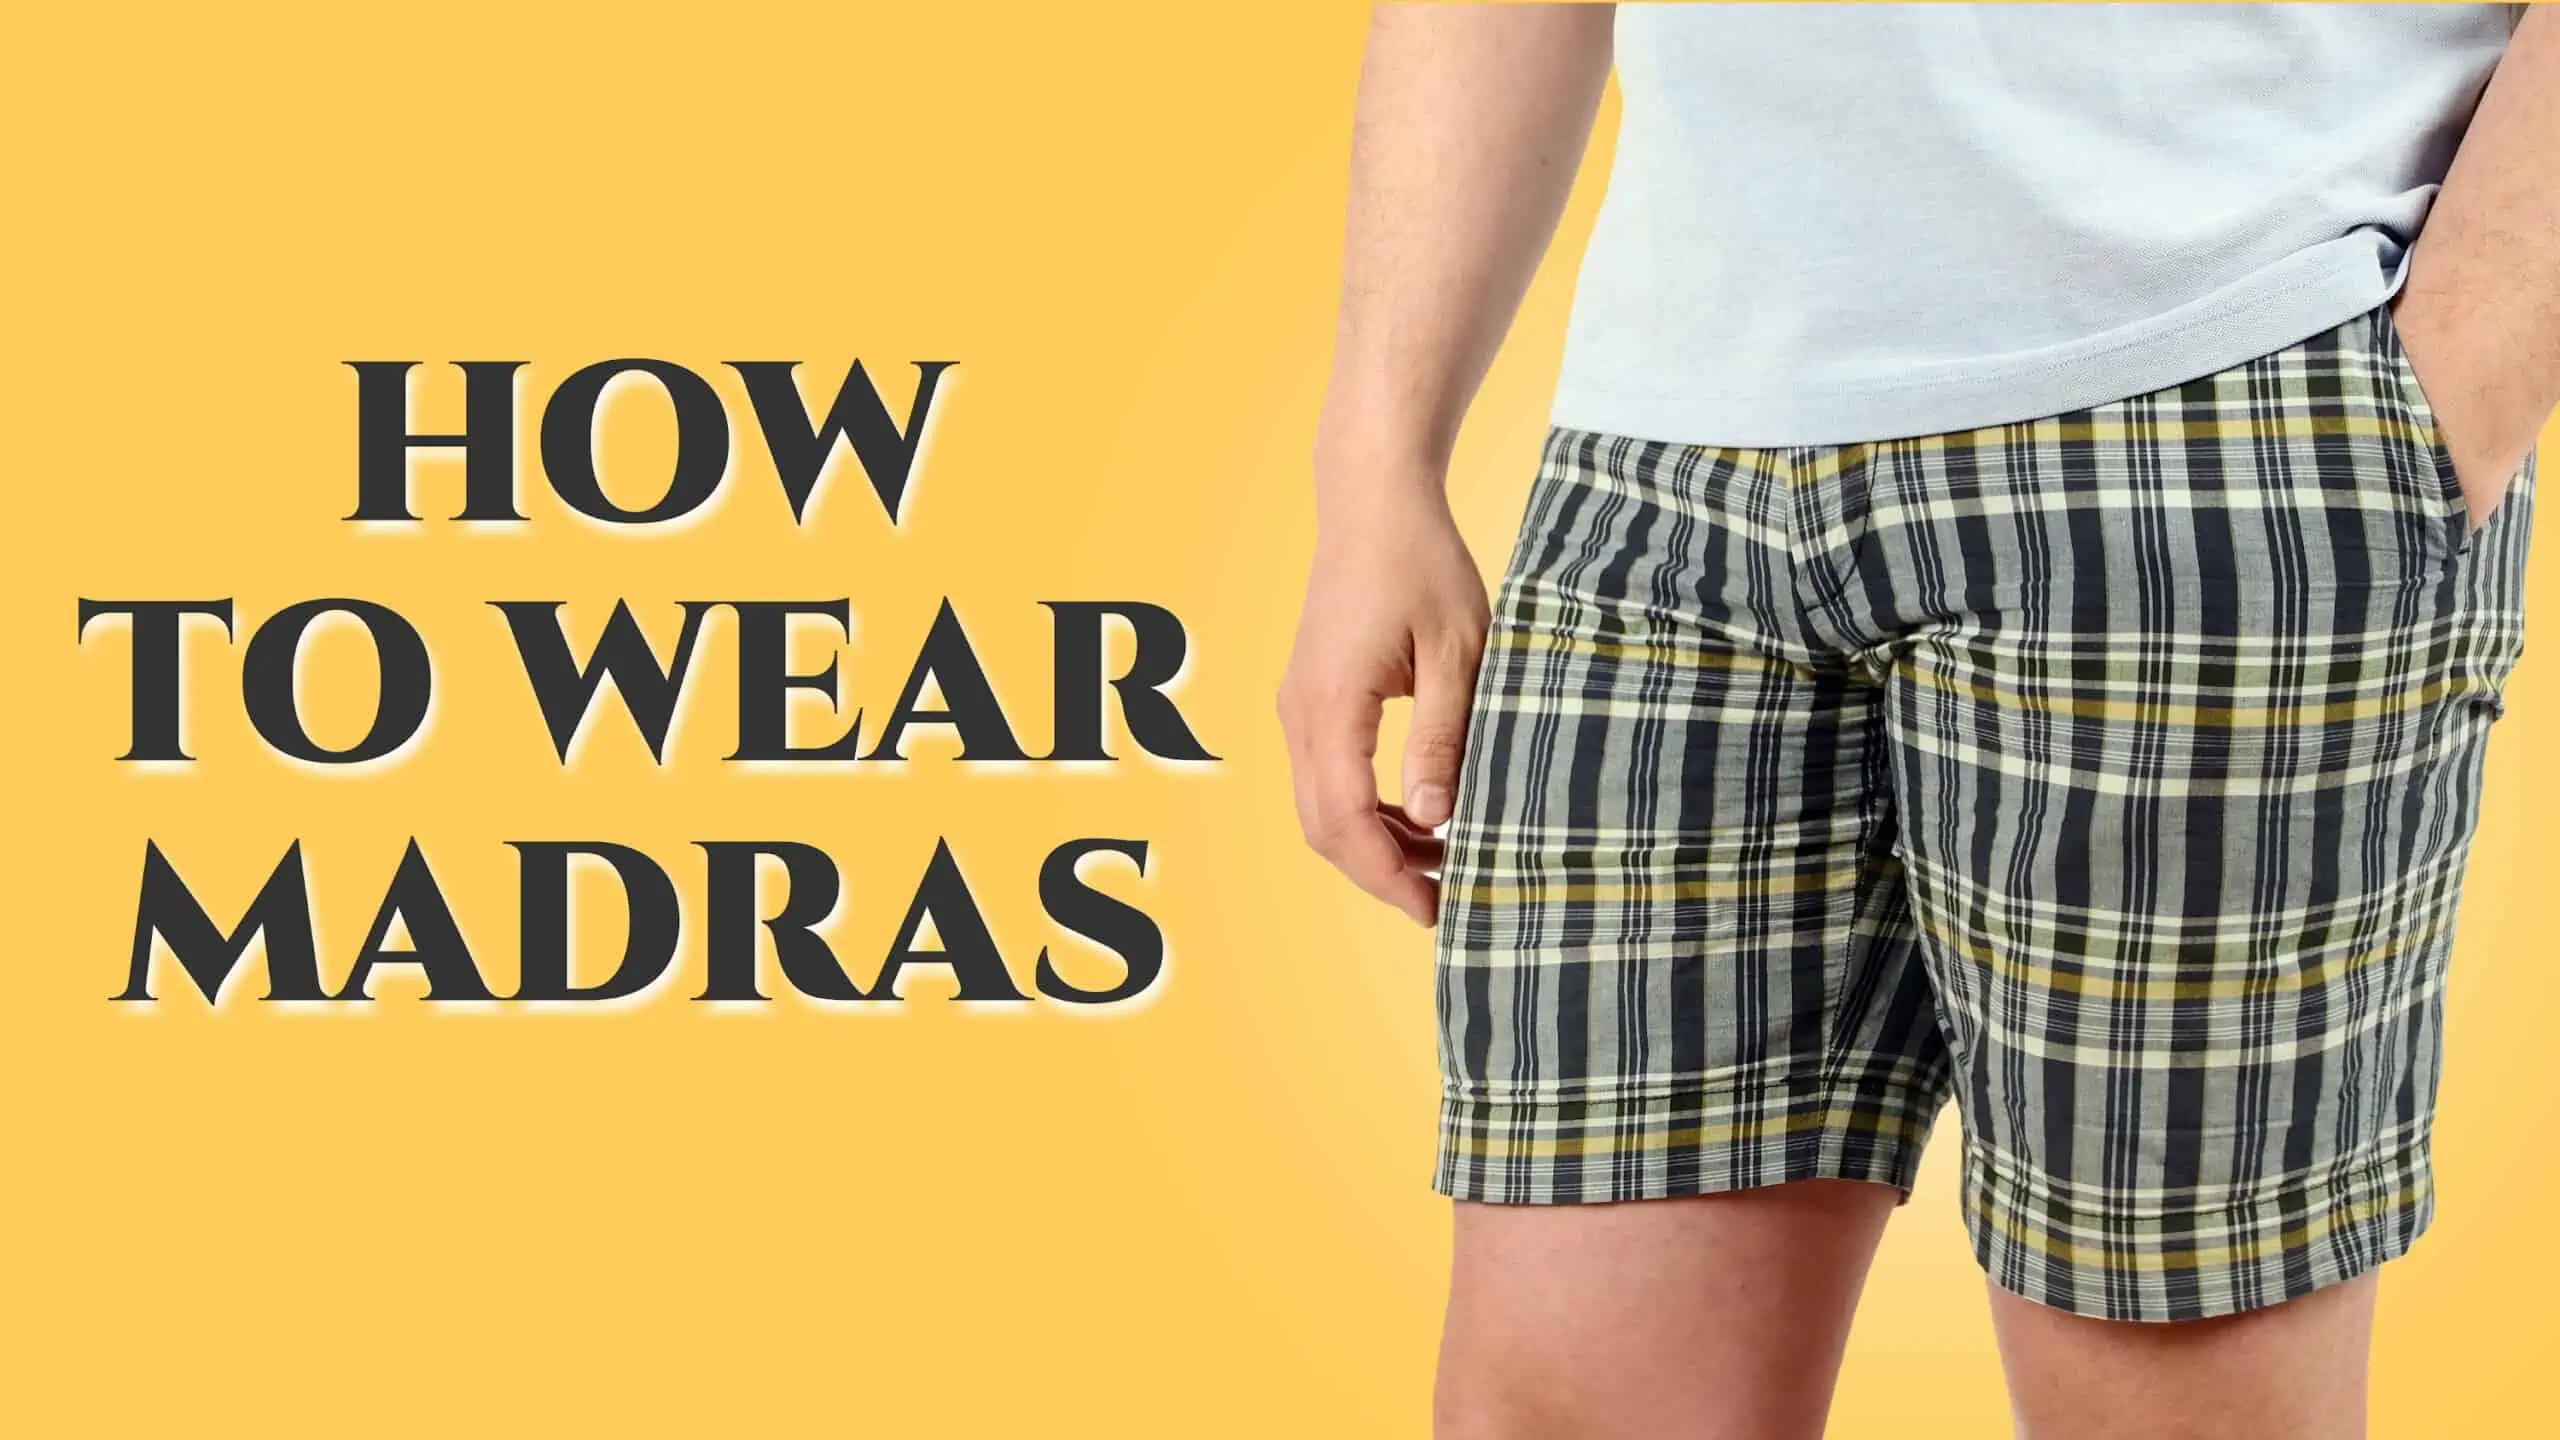 Guide for four ways to turn pants into shorts, with very